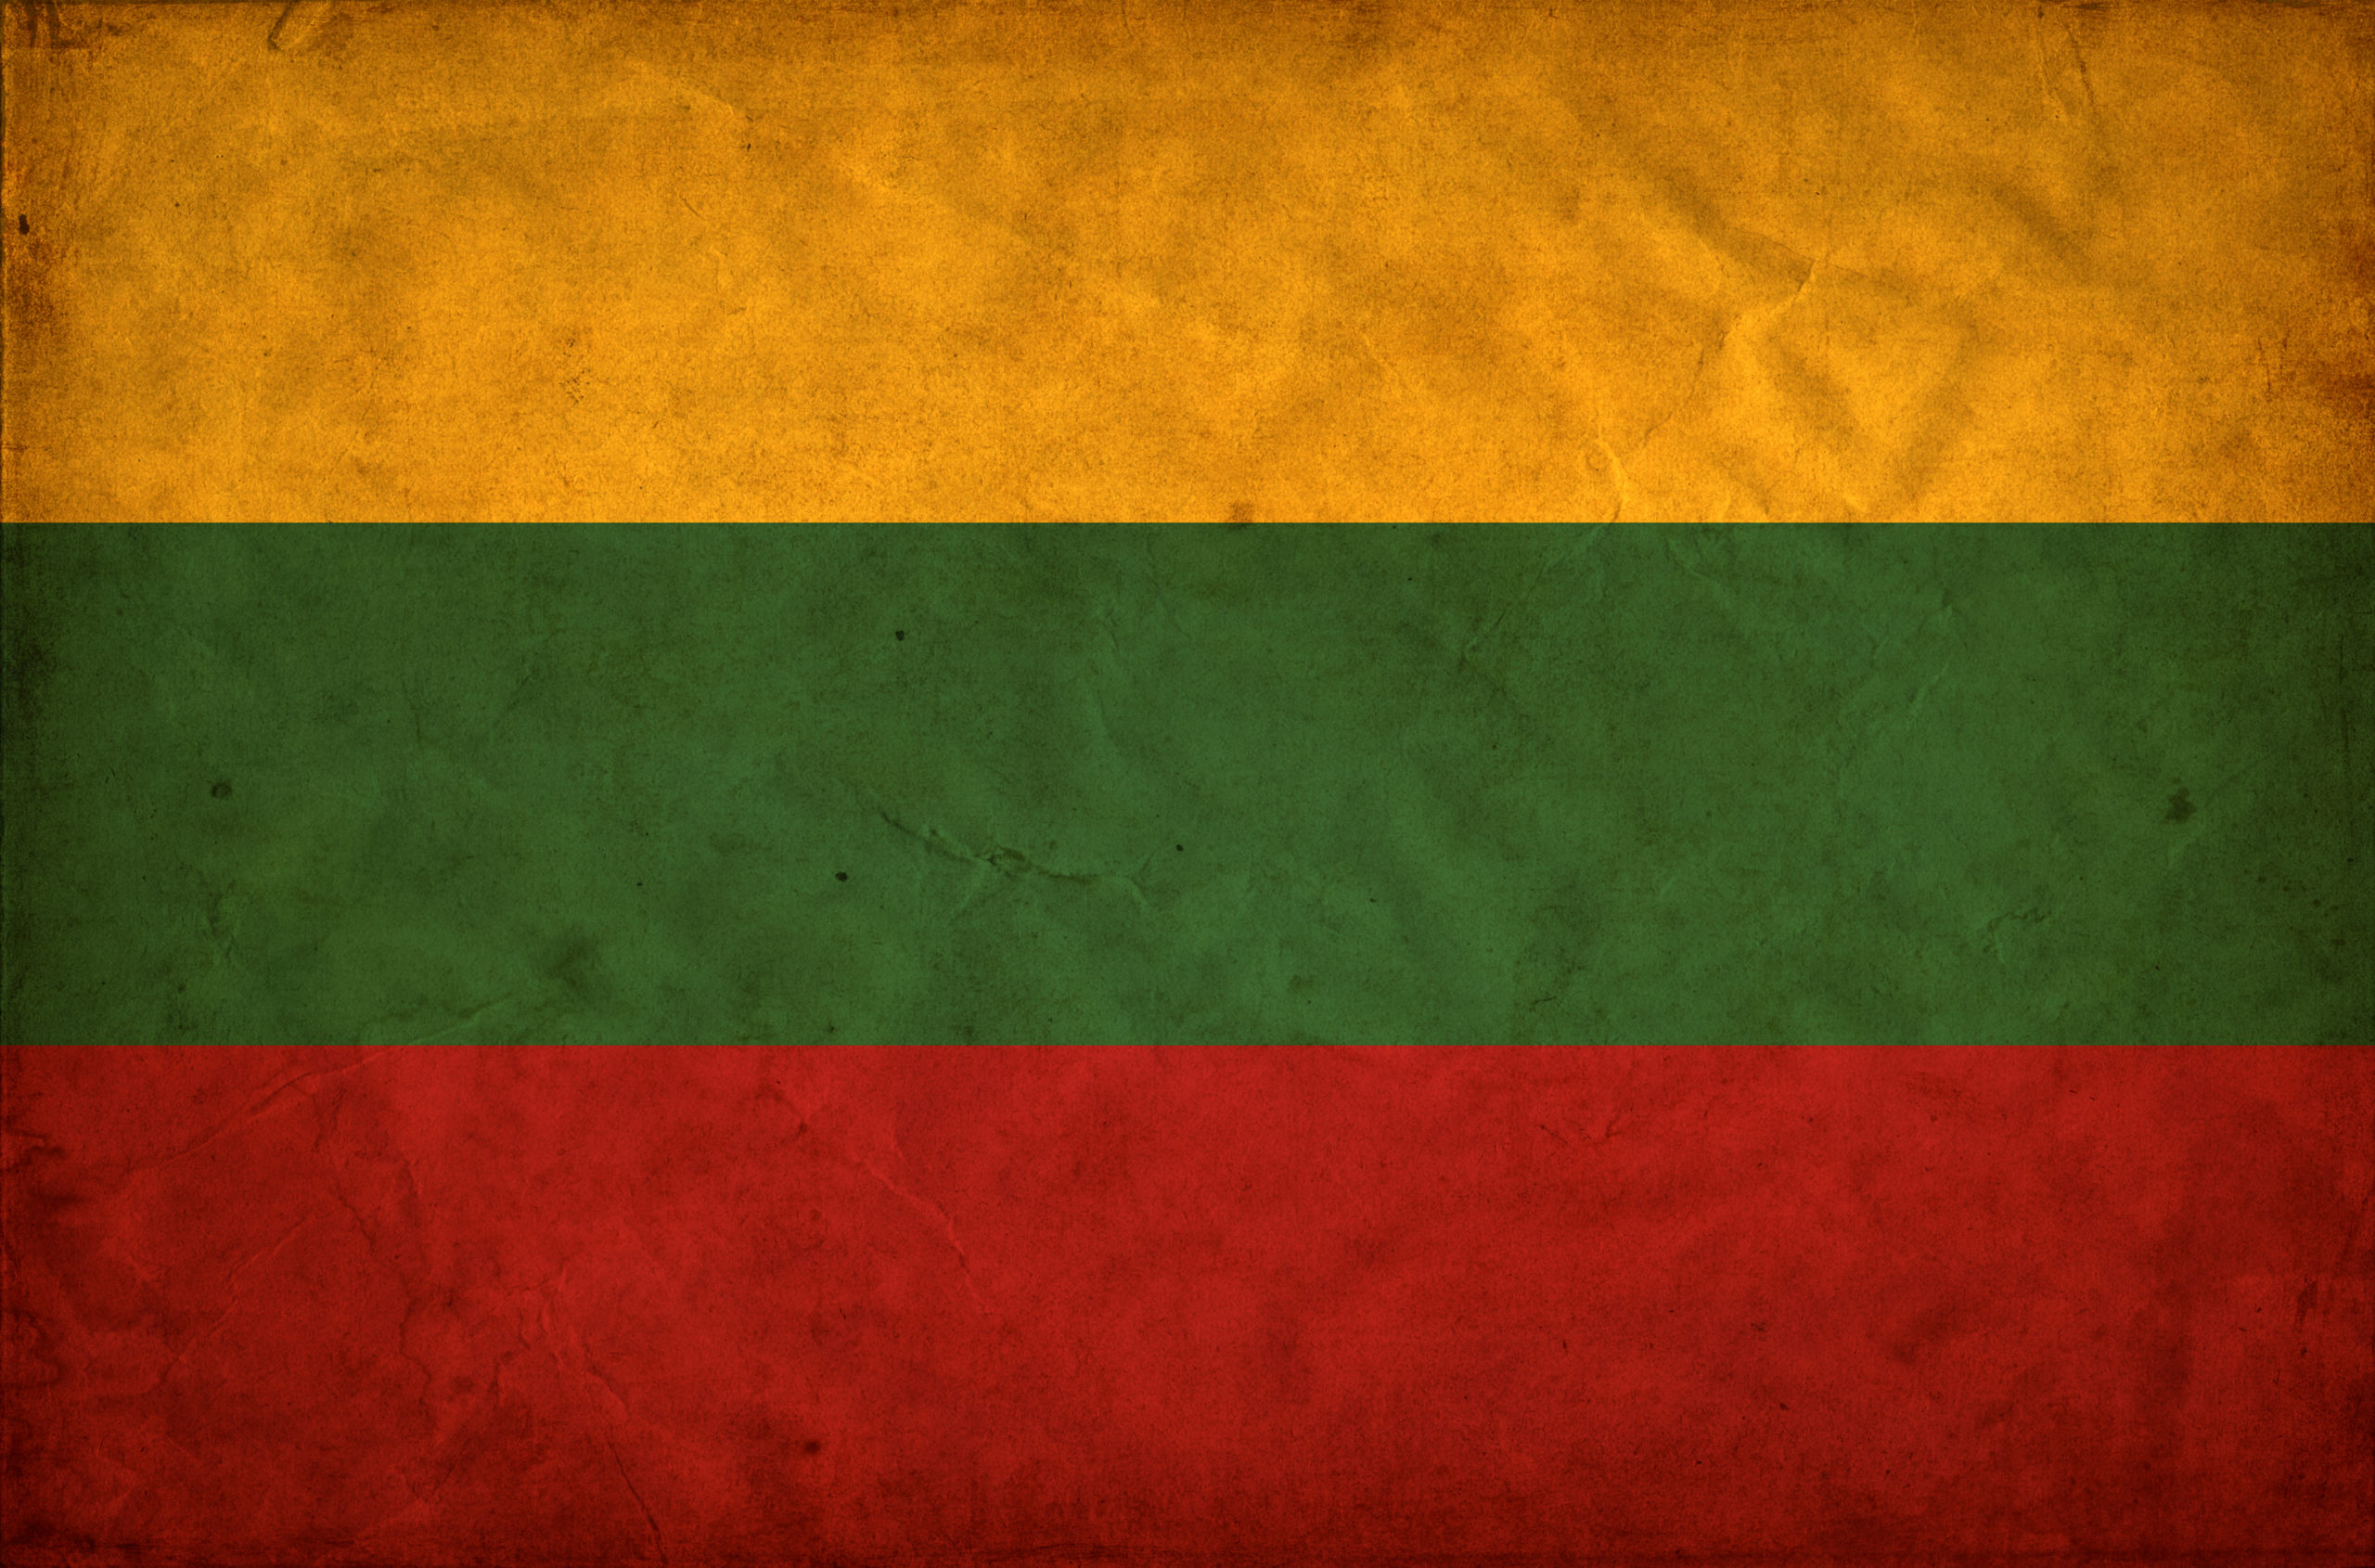 Lithuania Moves to Bolster Electricity Security